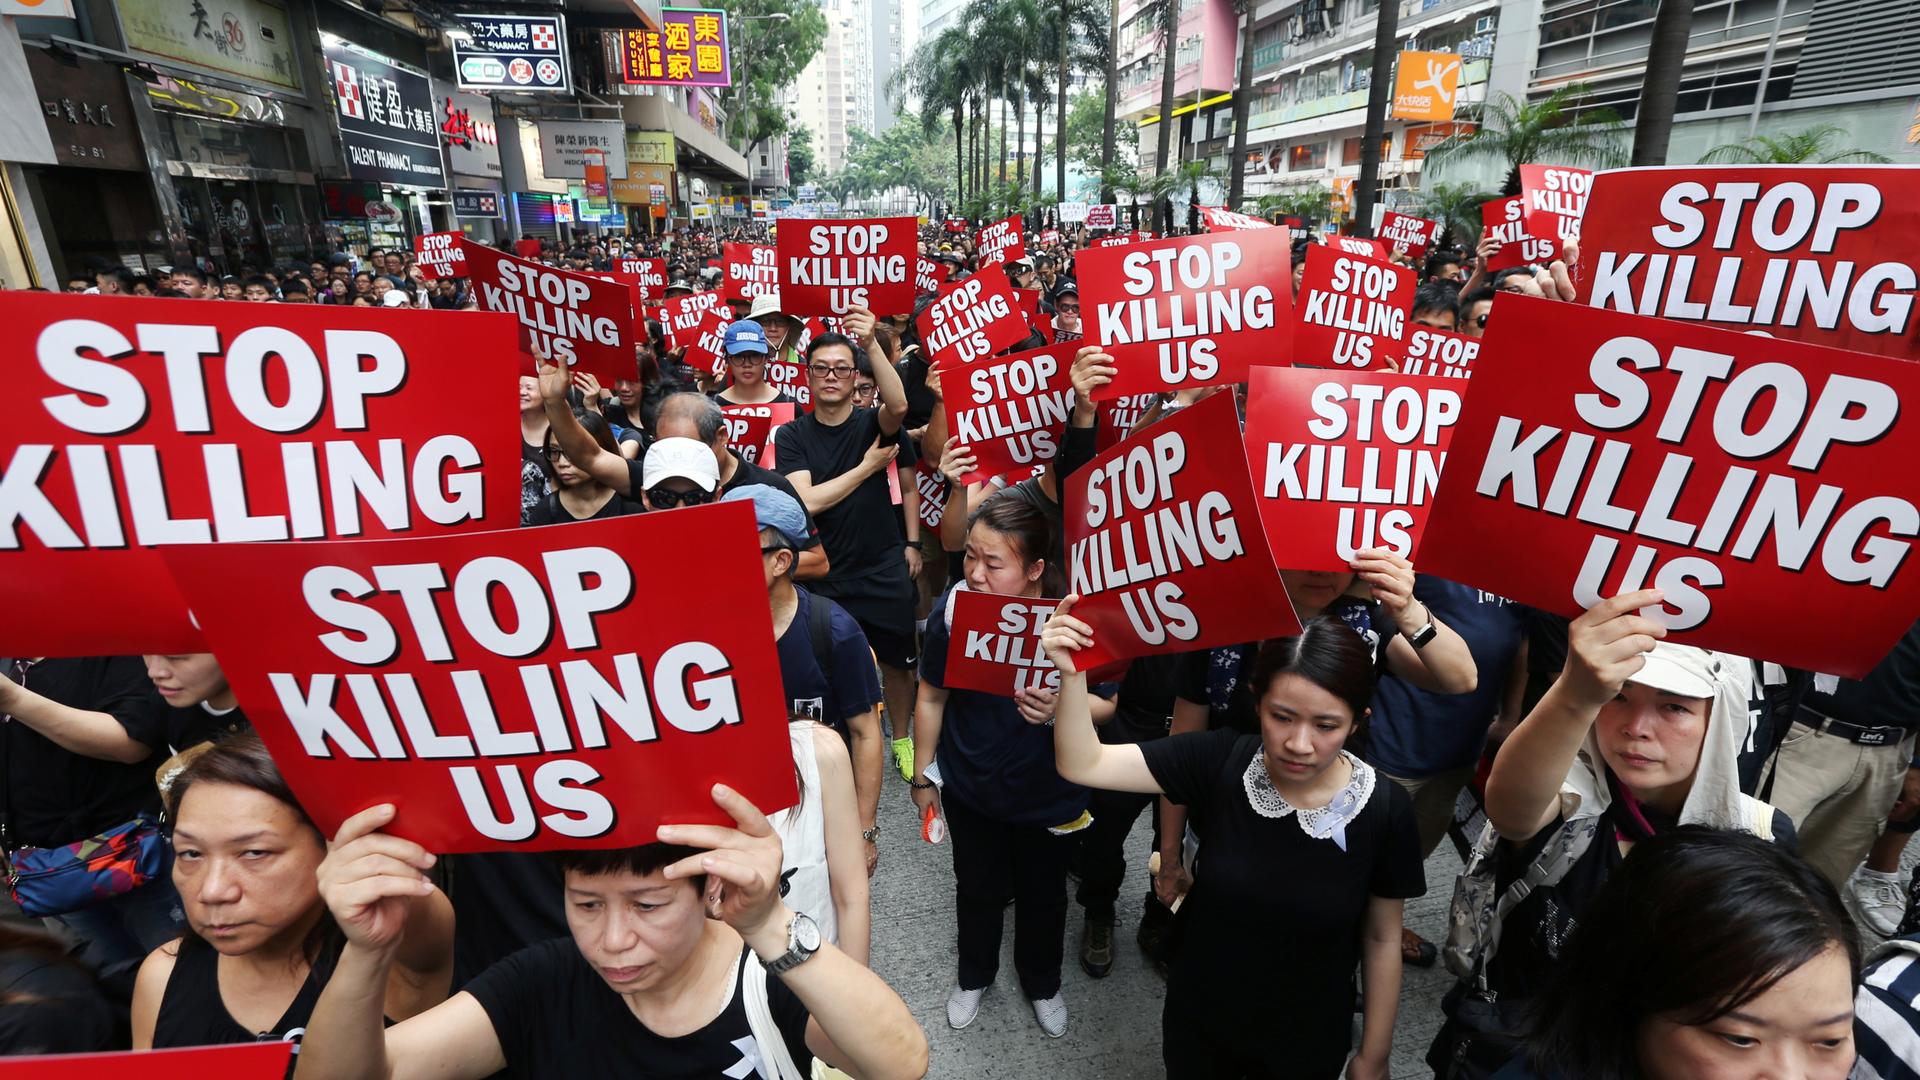 Protesters hold placards as they attend a demonstration demanding Hong Kong's leaders to step down and withdraw the extradition bill, in Hong Kong, China, June 16, 2019.